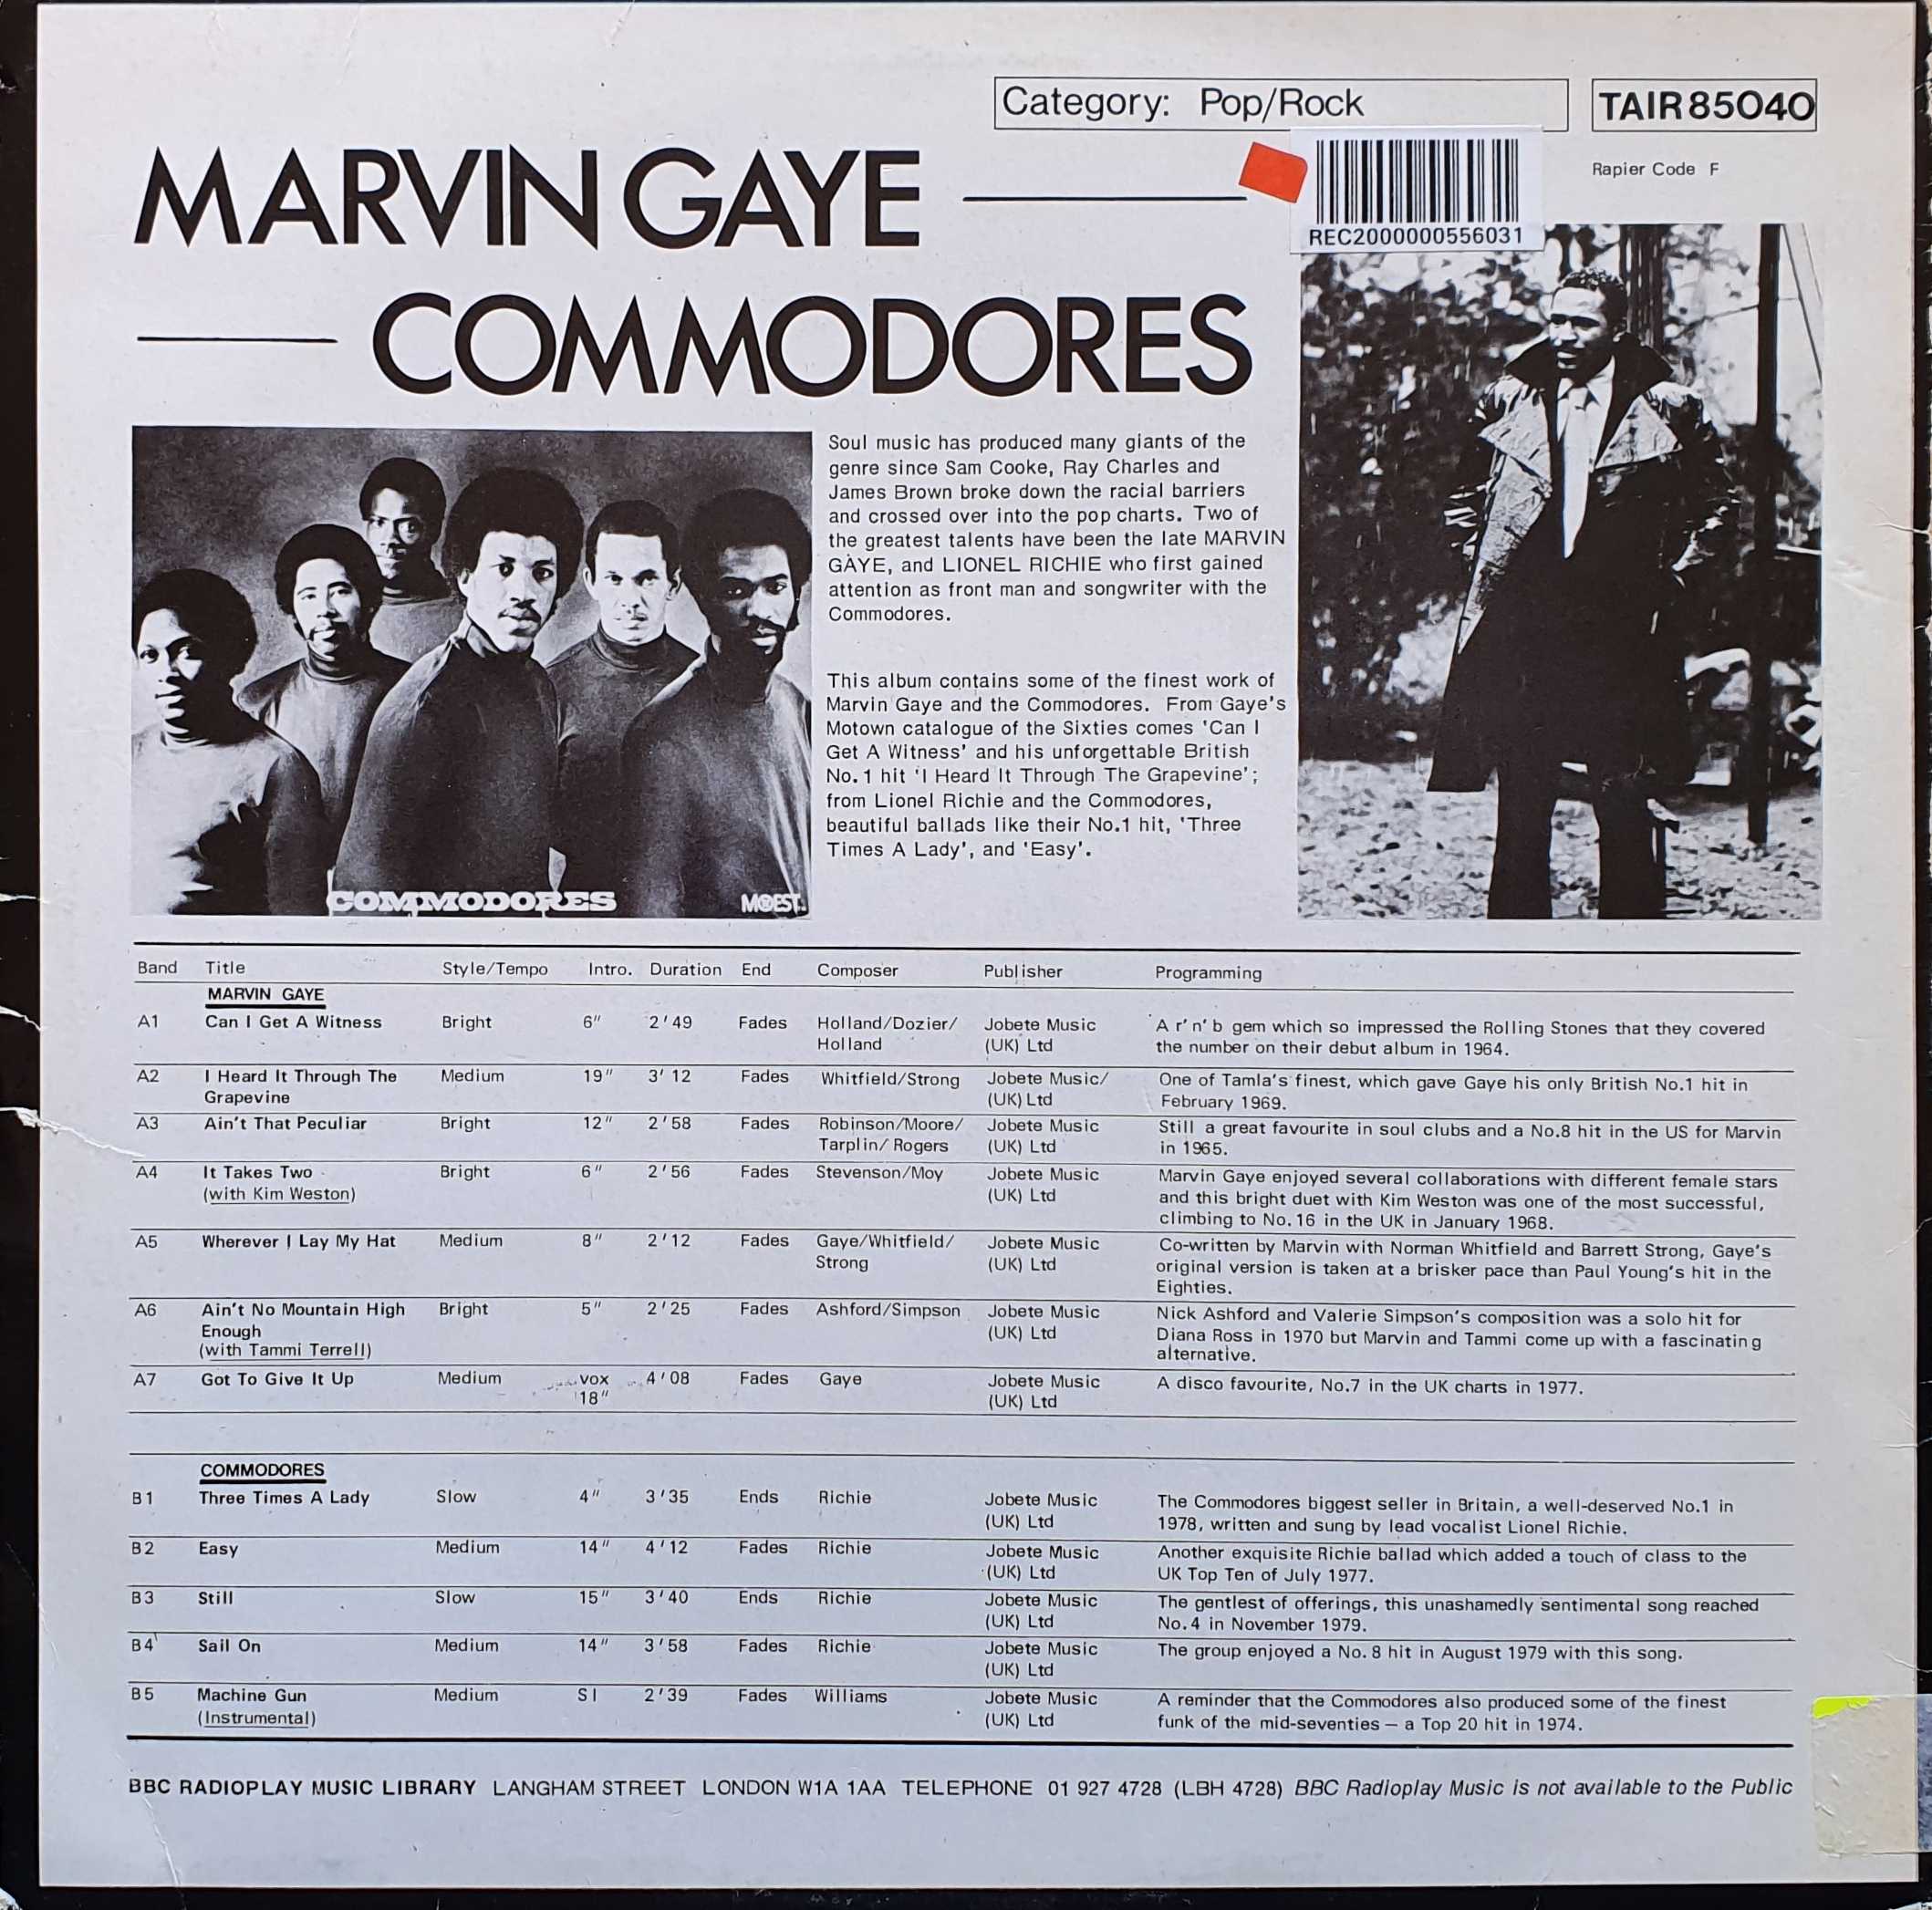 Picture of TAIR 85040 Marvin Gaye / Commodores by artist Marvin Gaye / Commodores from the BBC records and Tapes library